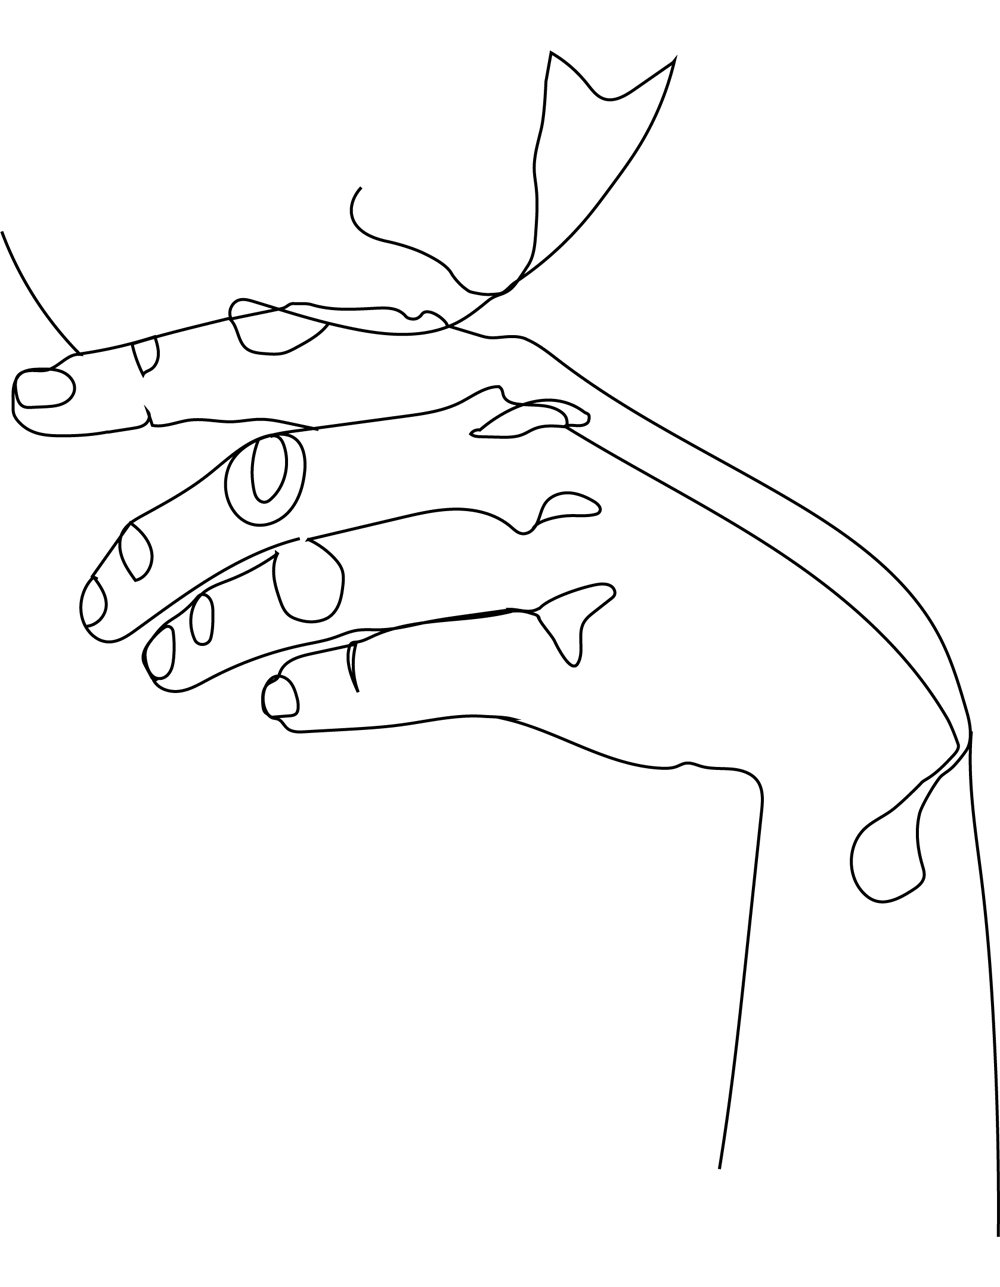 sketch of woman licking liquid off her hand